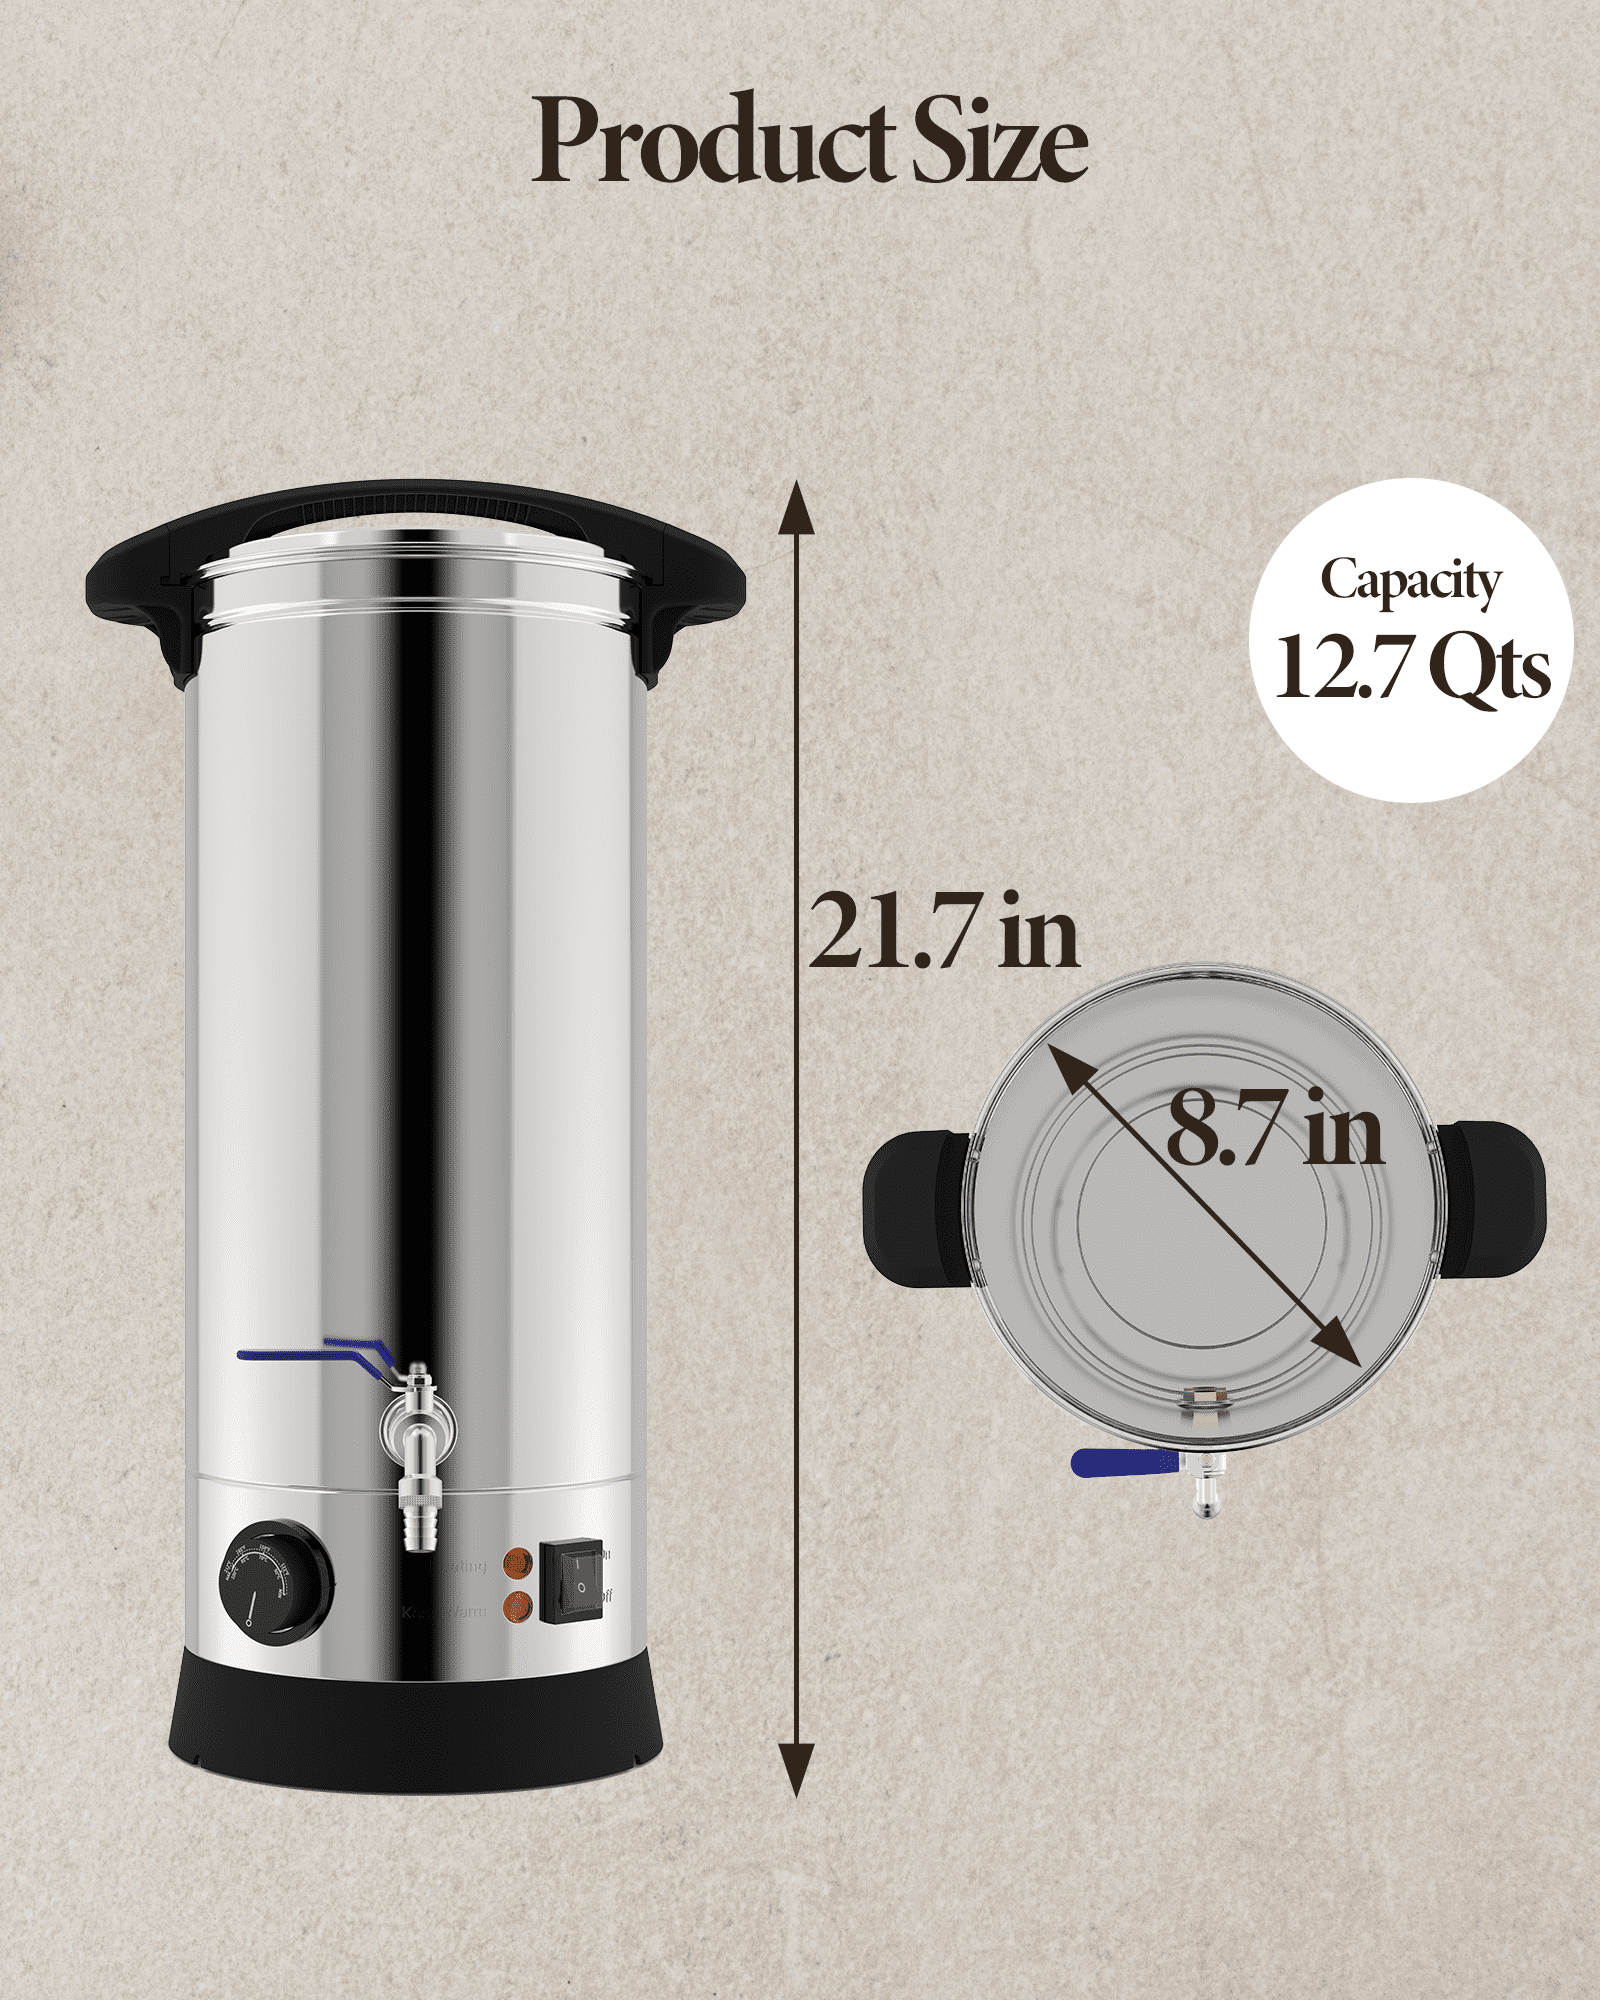 17.5 LB Wax Melter for Candle Making: Electric Aluminum Wax Melting Pot  Machine Regular Size Quick-pour Spout and Free Ebook 